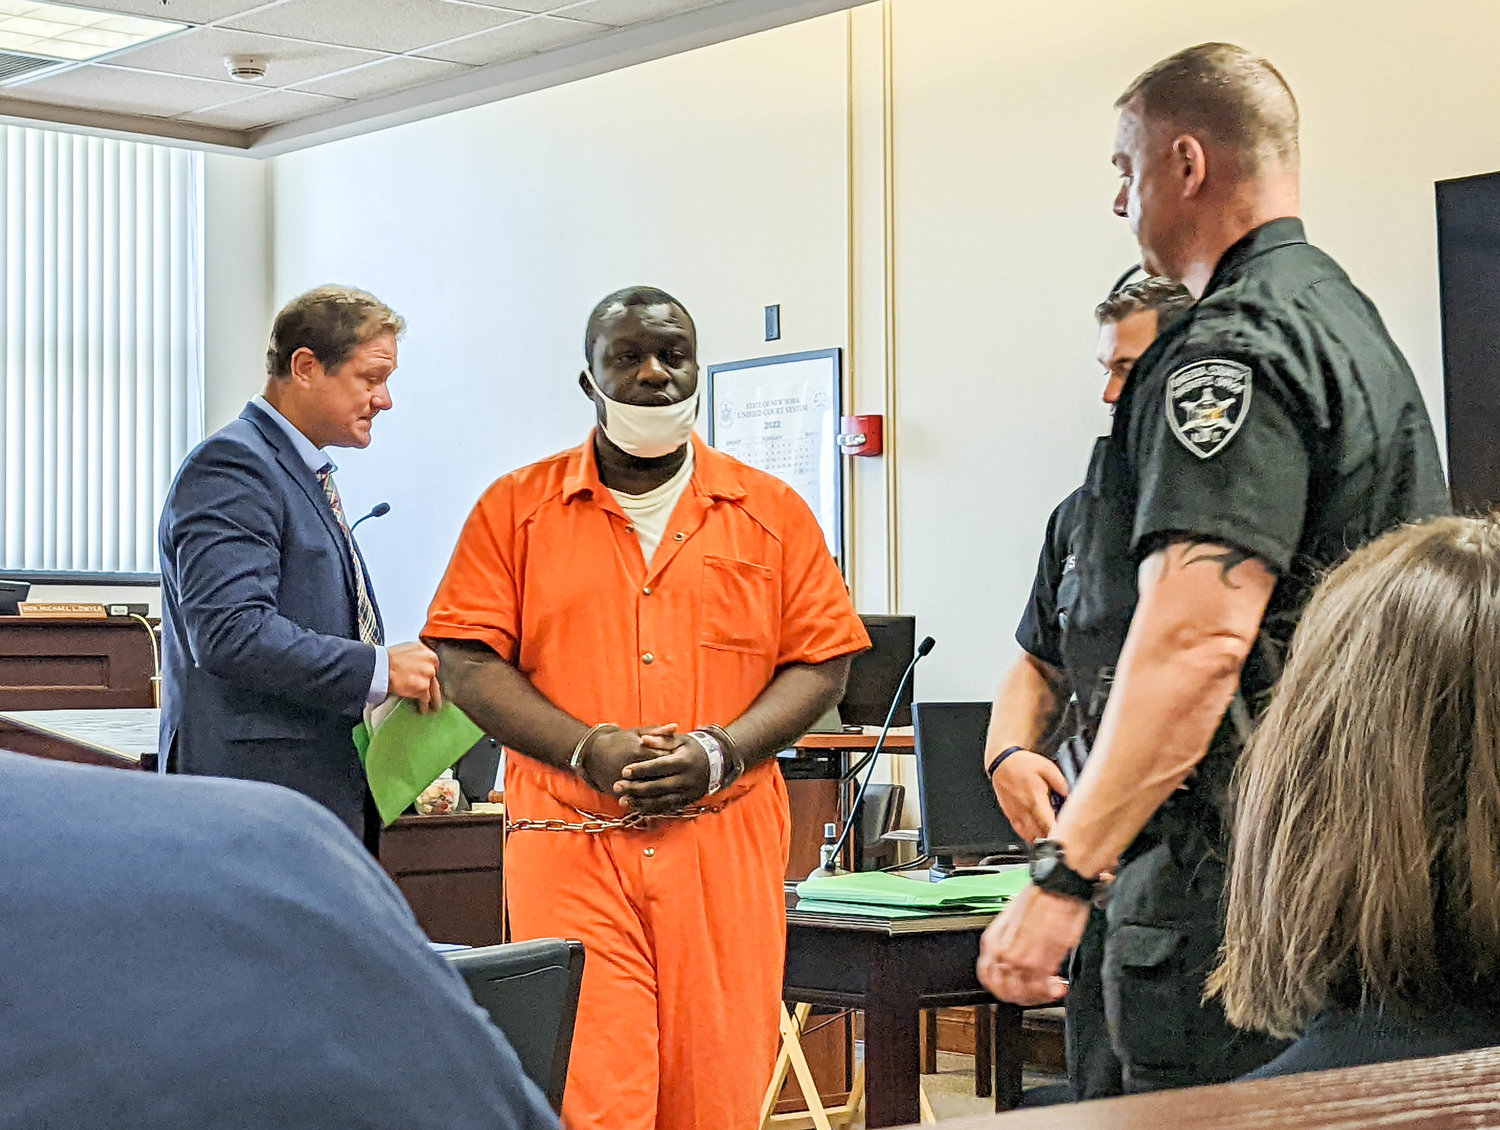 Convicted killer Anthony Willis, of Utica, leaves the courtroom in Oneida County Court Monday, Aug. 8, after being sentenced to 21 years to life in state prison for the February shooting death of Anthony Higgs. The victim’s mother memorialized Higgs in a letter read in court.